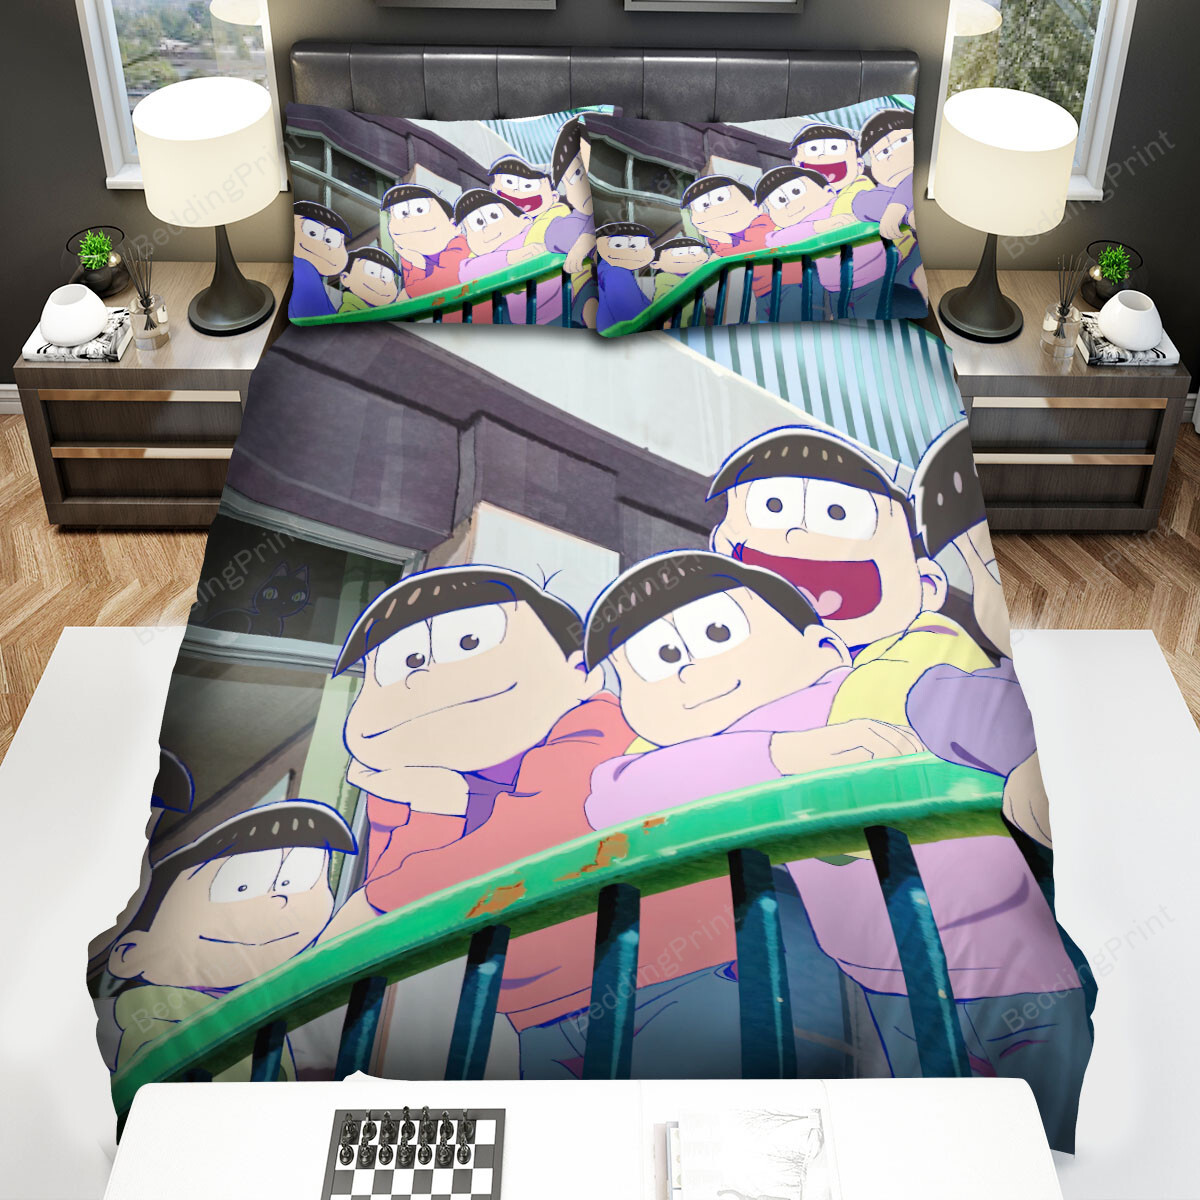 Mr. Osomatsu The Sextuplets Hanging Out Bed Sheets Spread Duvet Cover Bedding Sets